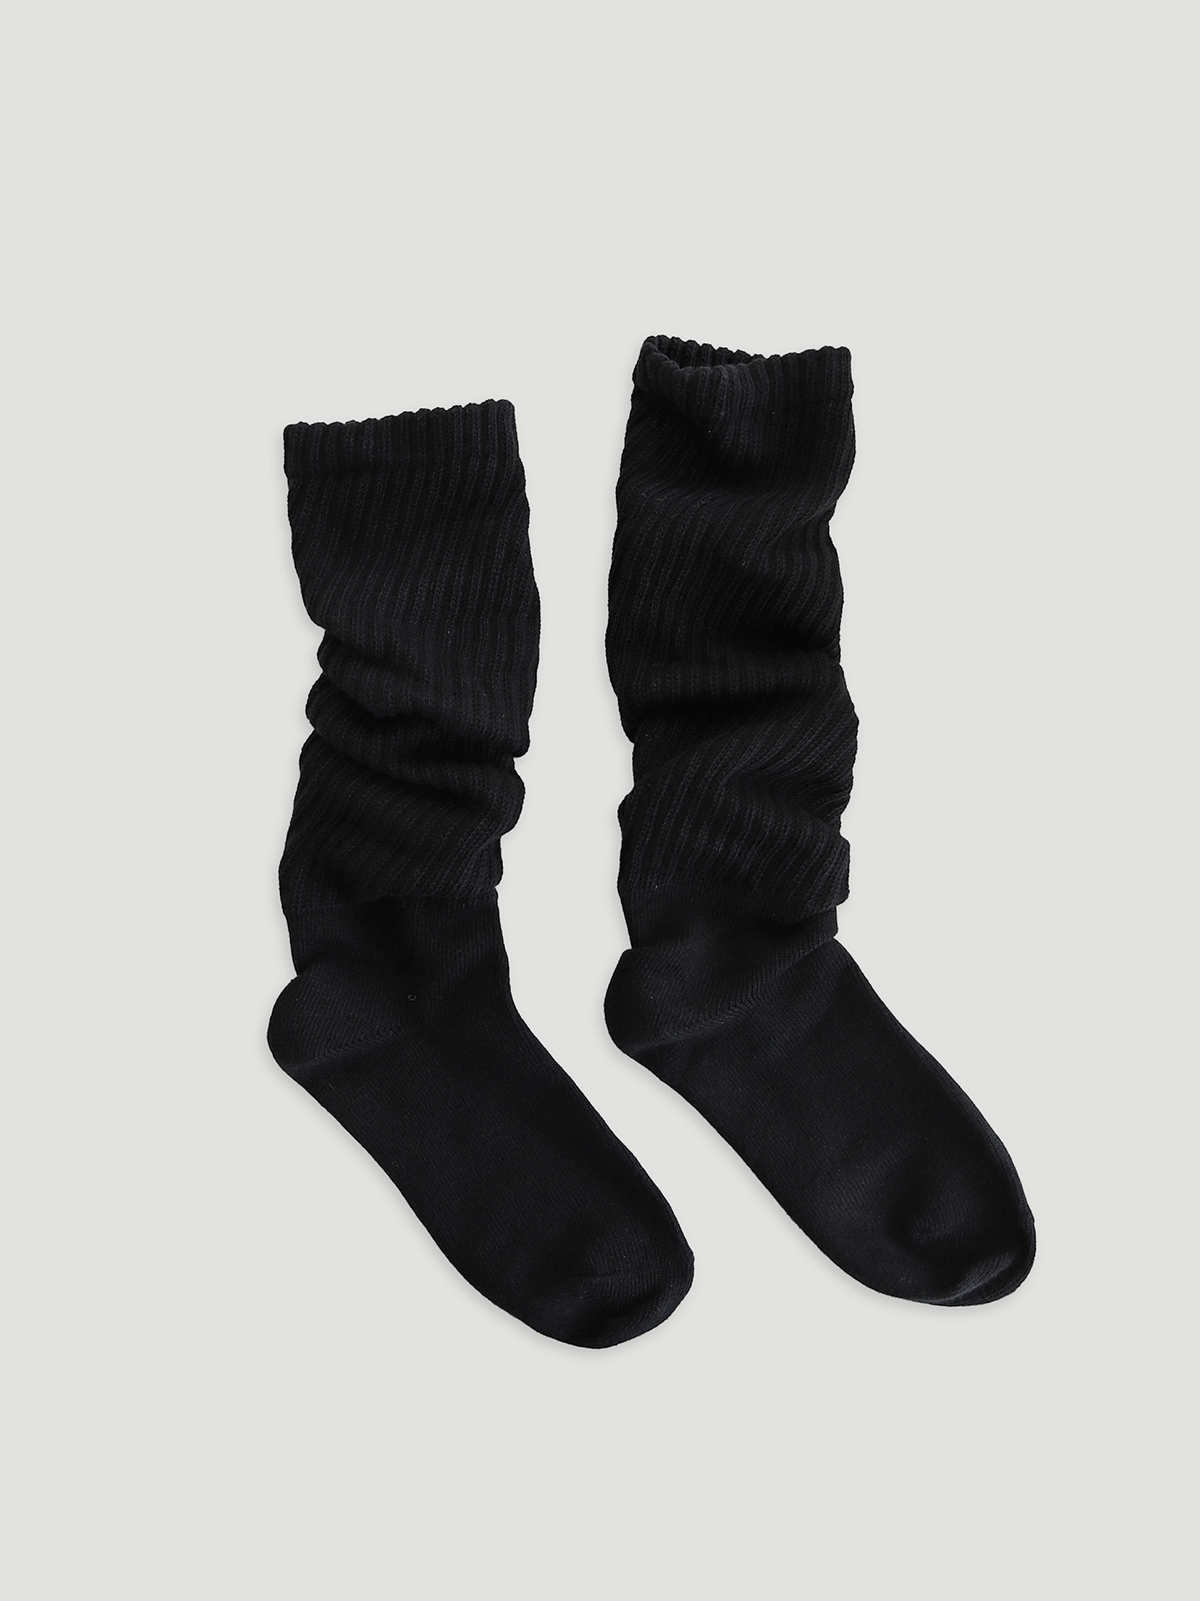 DAILY GOLGI LONG SOCKS (3COLORS)(SOLD OUT)